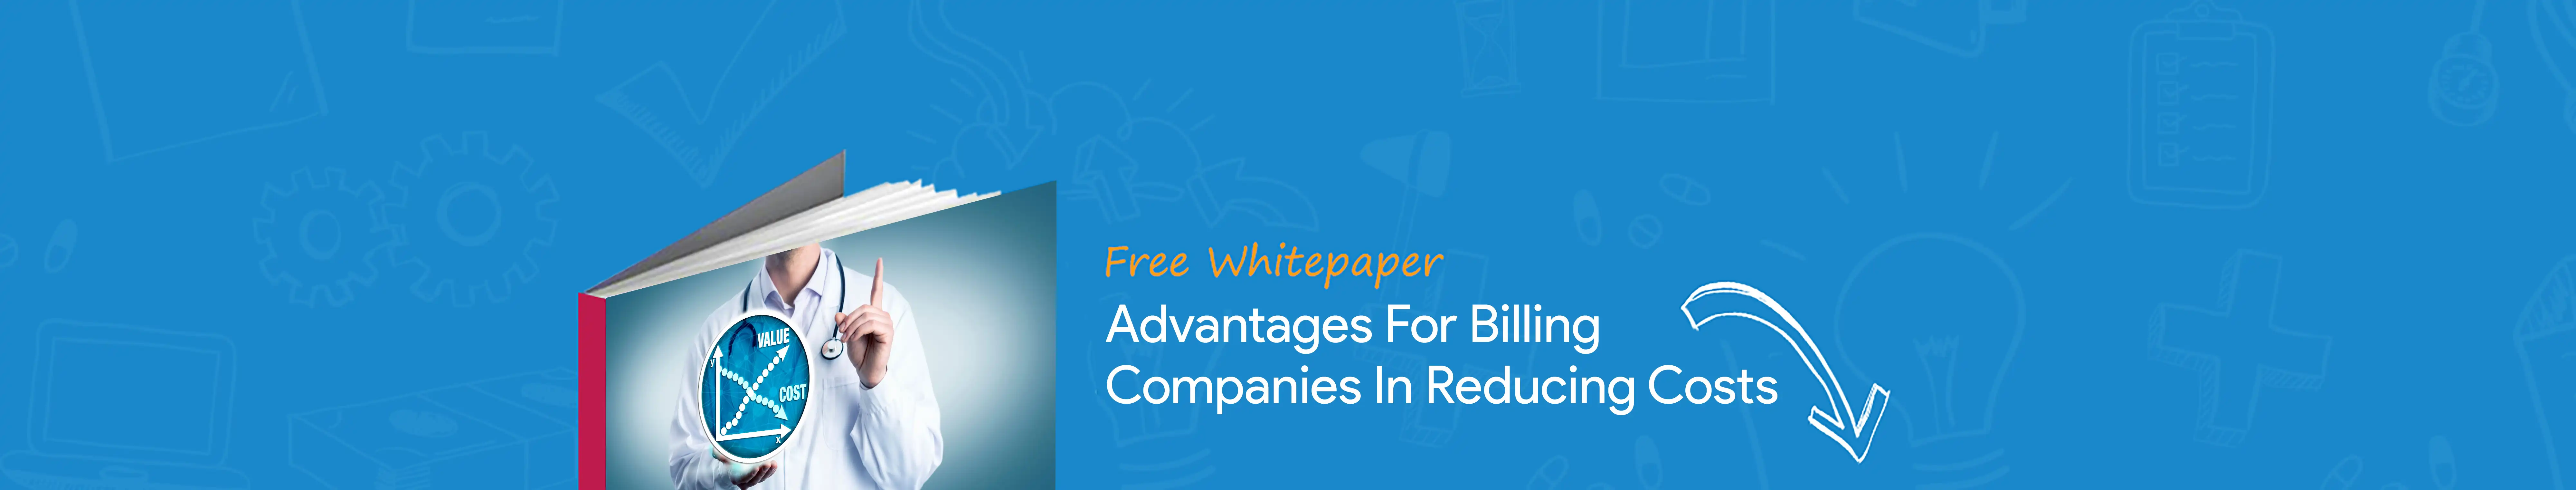 advantages for billing companies in reducing costs and accelerating growth banner